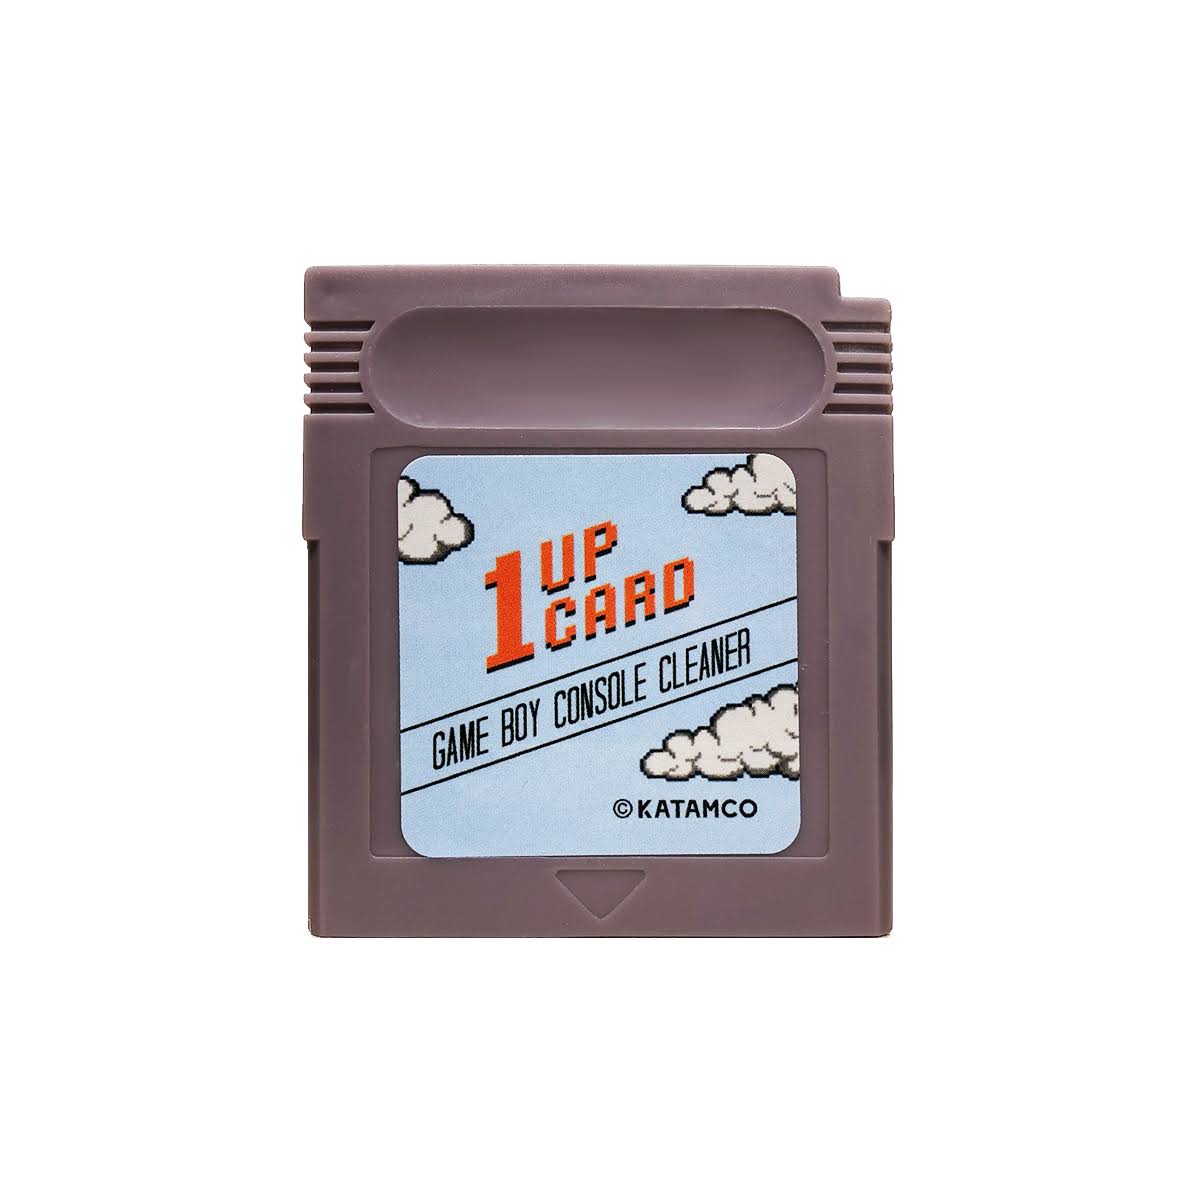 Nintendo 1UPcard Game Boy Console Cleaner